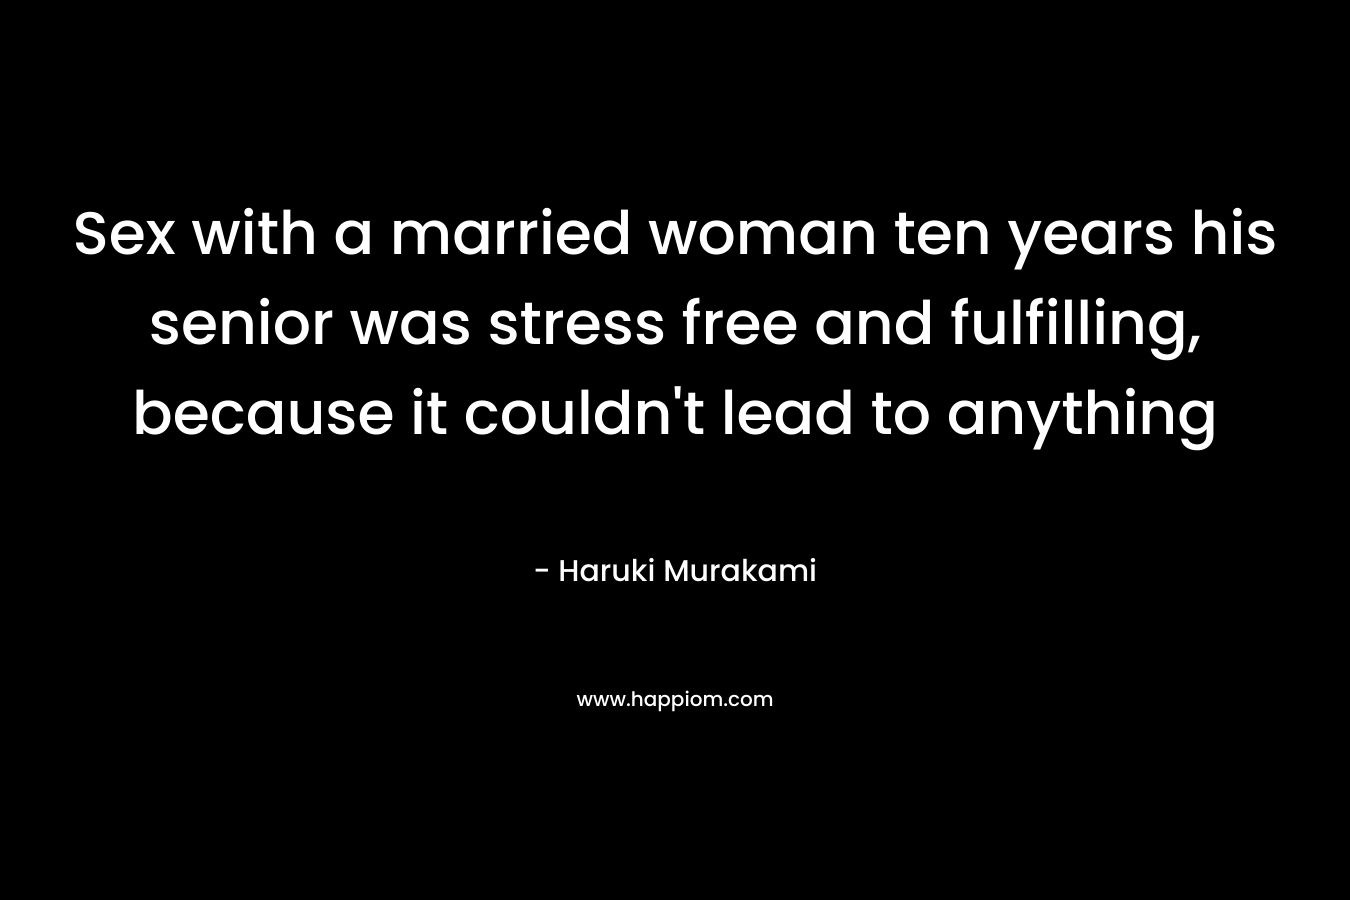 Sex with a married woman ten years his senior was stress free and fulfilling, because it couldn't lead to anything